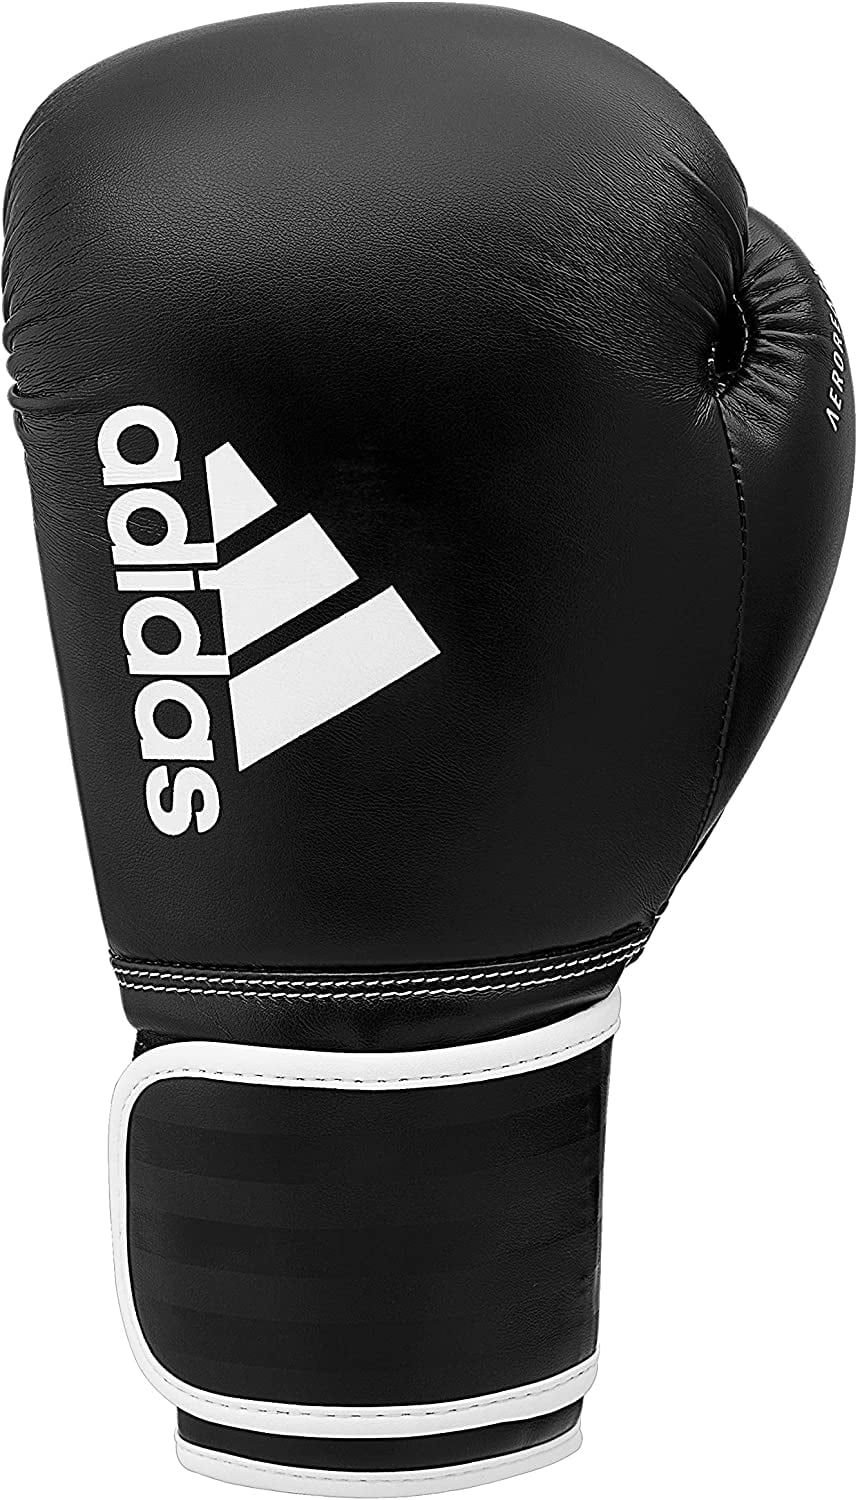 80 Kickboxing, and Gloves, Training, Black Women Men Boxing, Adidas Bag, for Boxing and Hybrid 6 for Oz.,